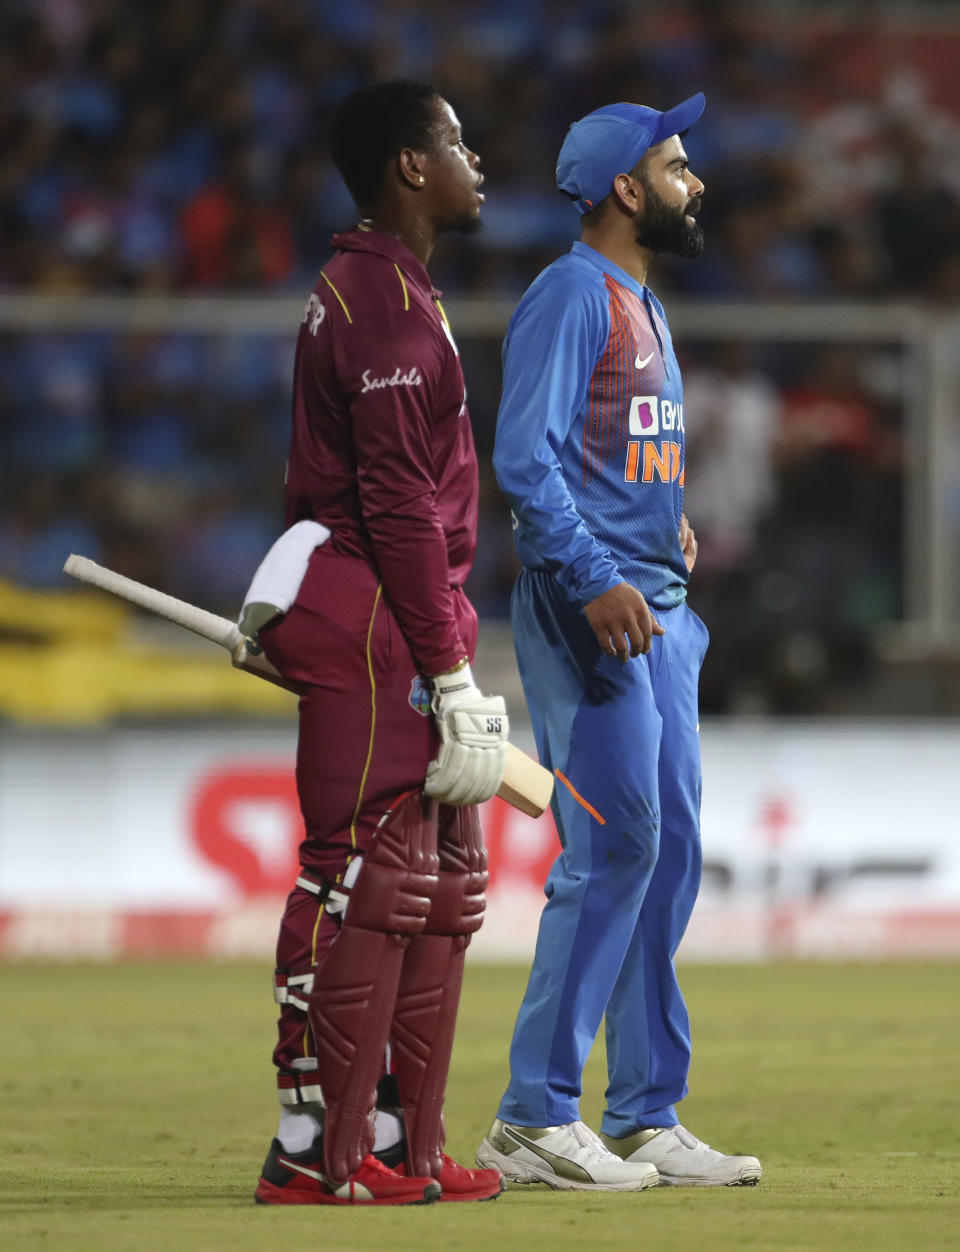 India's captain Virat Kohli, right, and West Indies' Shimron Hetmyer watch the replay of Hetmyer's dismissal as they await umpire's decision during the second Twenty20 international cricket match between India and West Indies in Thiruvanathapuram, India, Sunday, Dec. 8, 2019. (AP Photo/Aijaz Rahi)